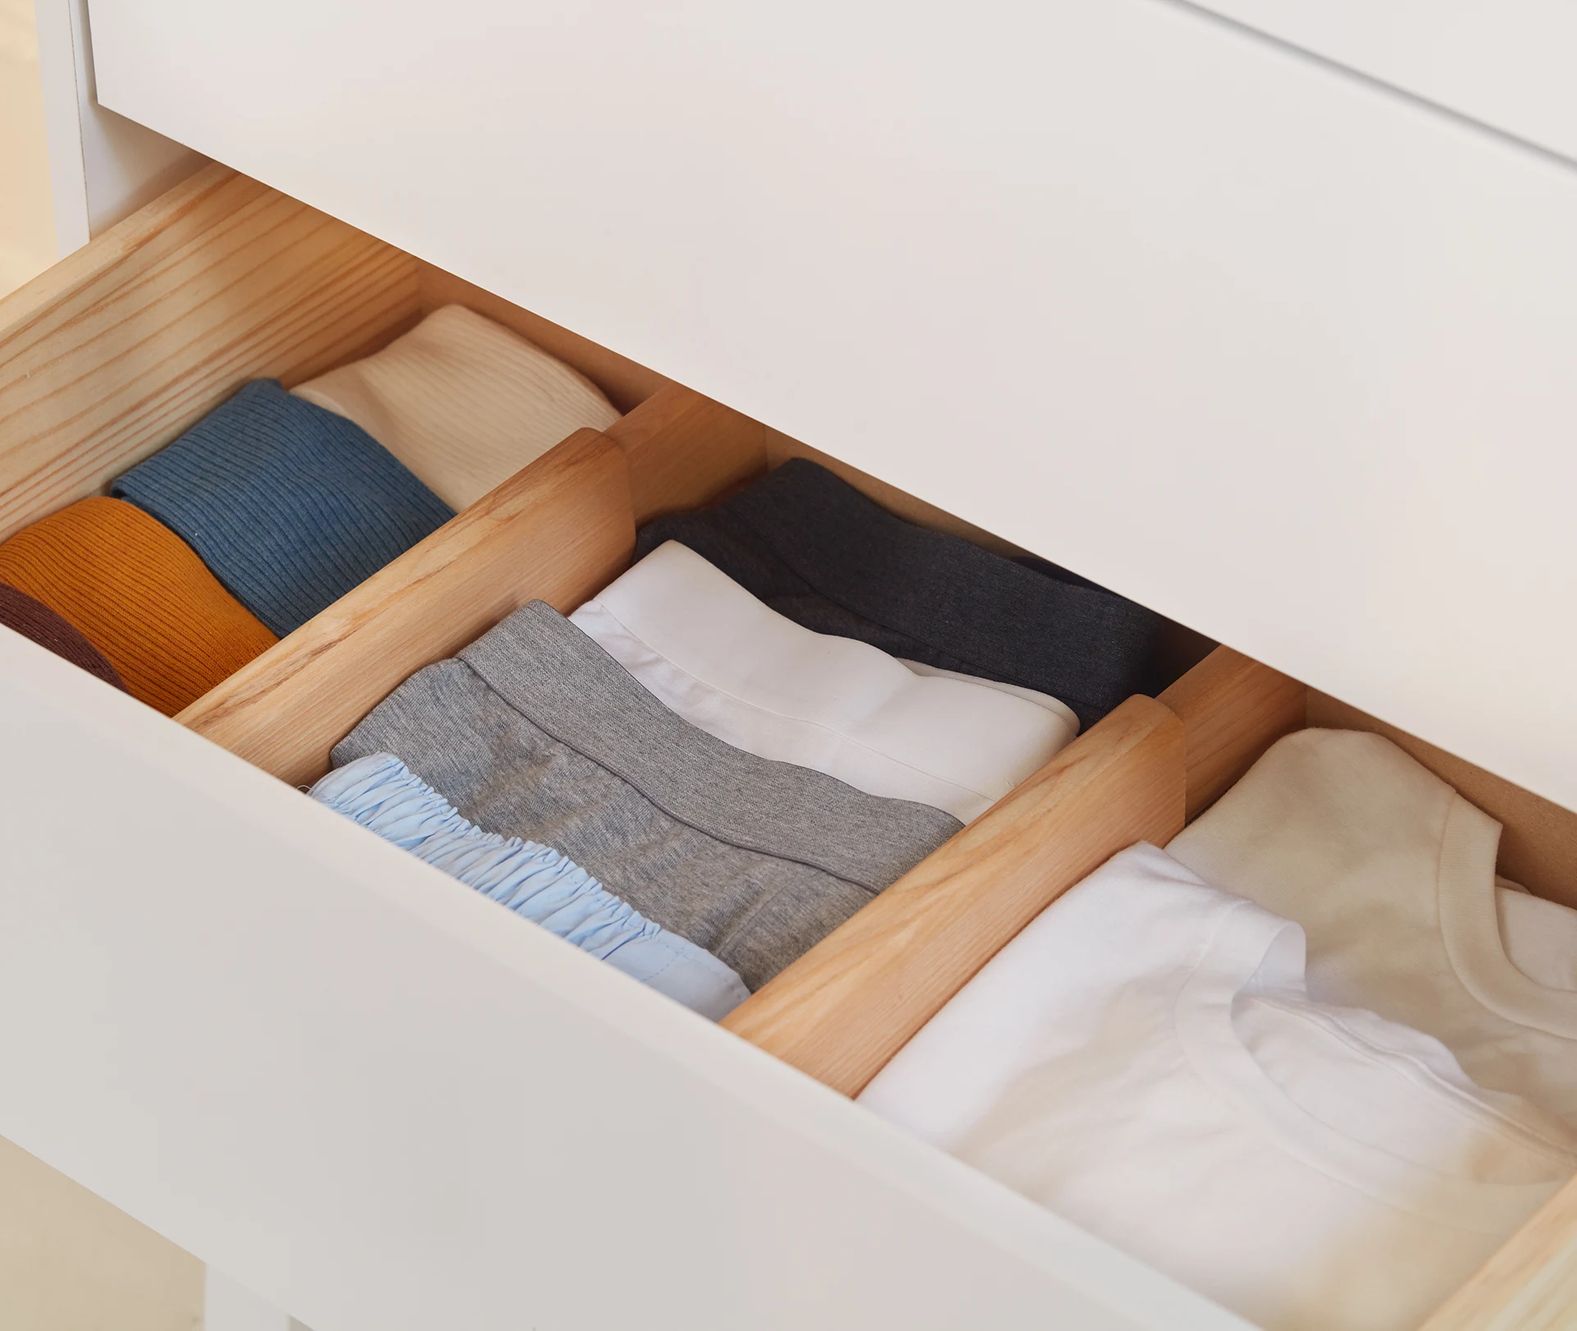 8 of the Best Kitchen Drawer Organizers in 2023, According to the Pros